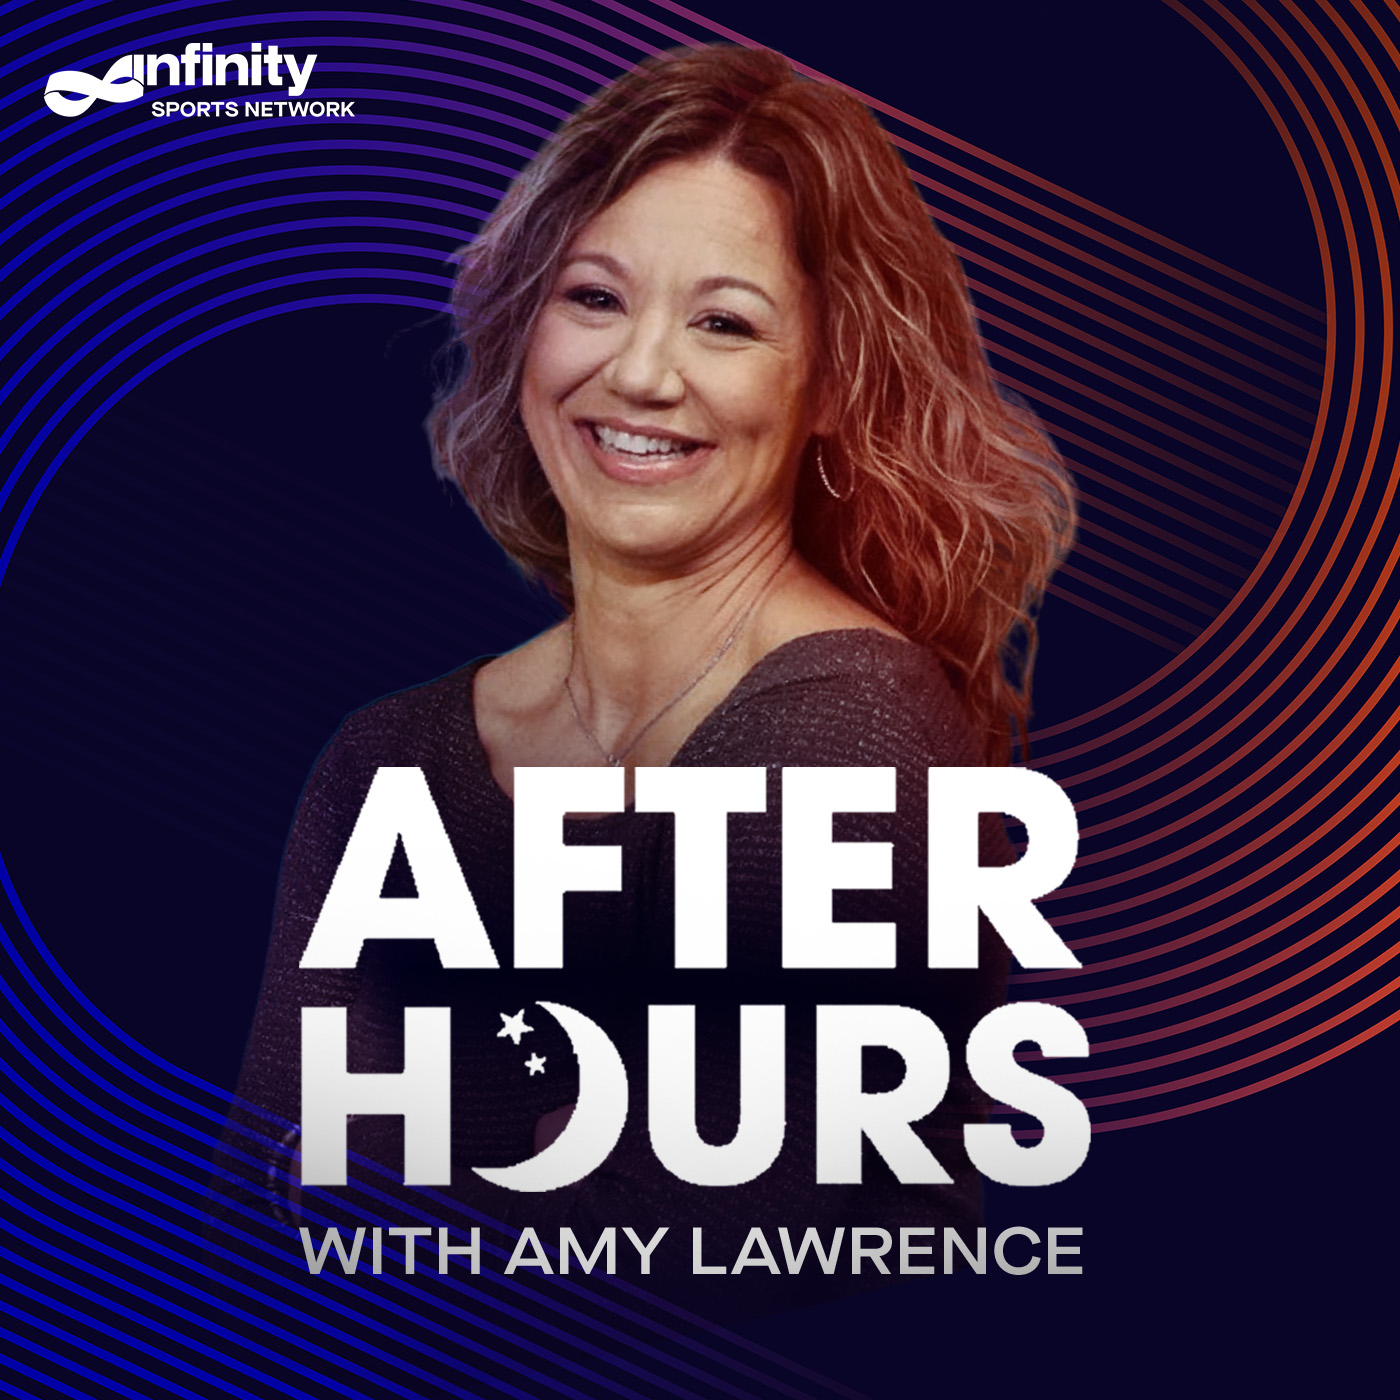 7/14/21 After Hours with Amy Lawrence PODCAST: Hour 4